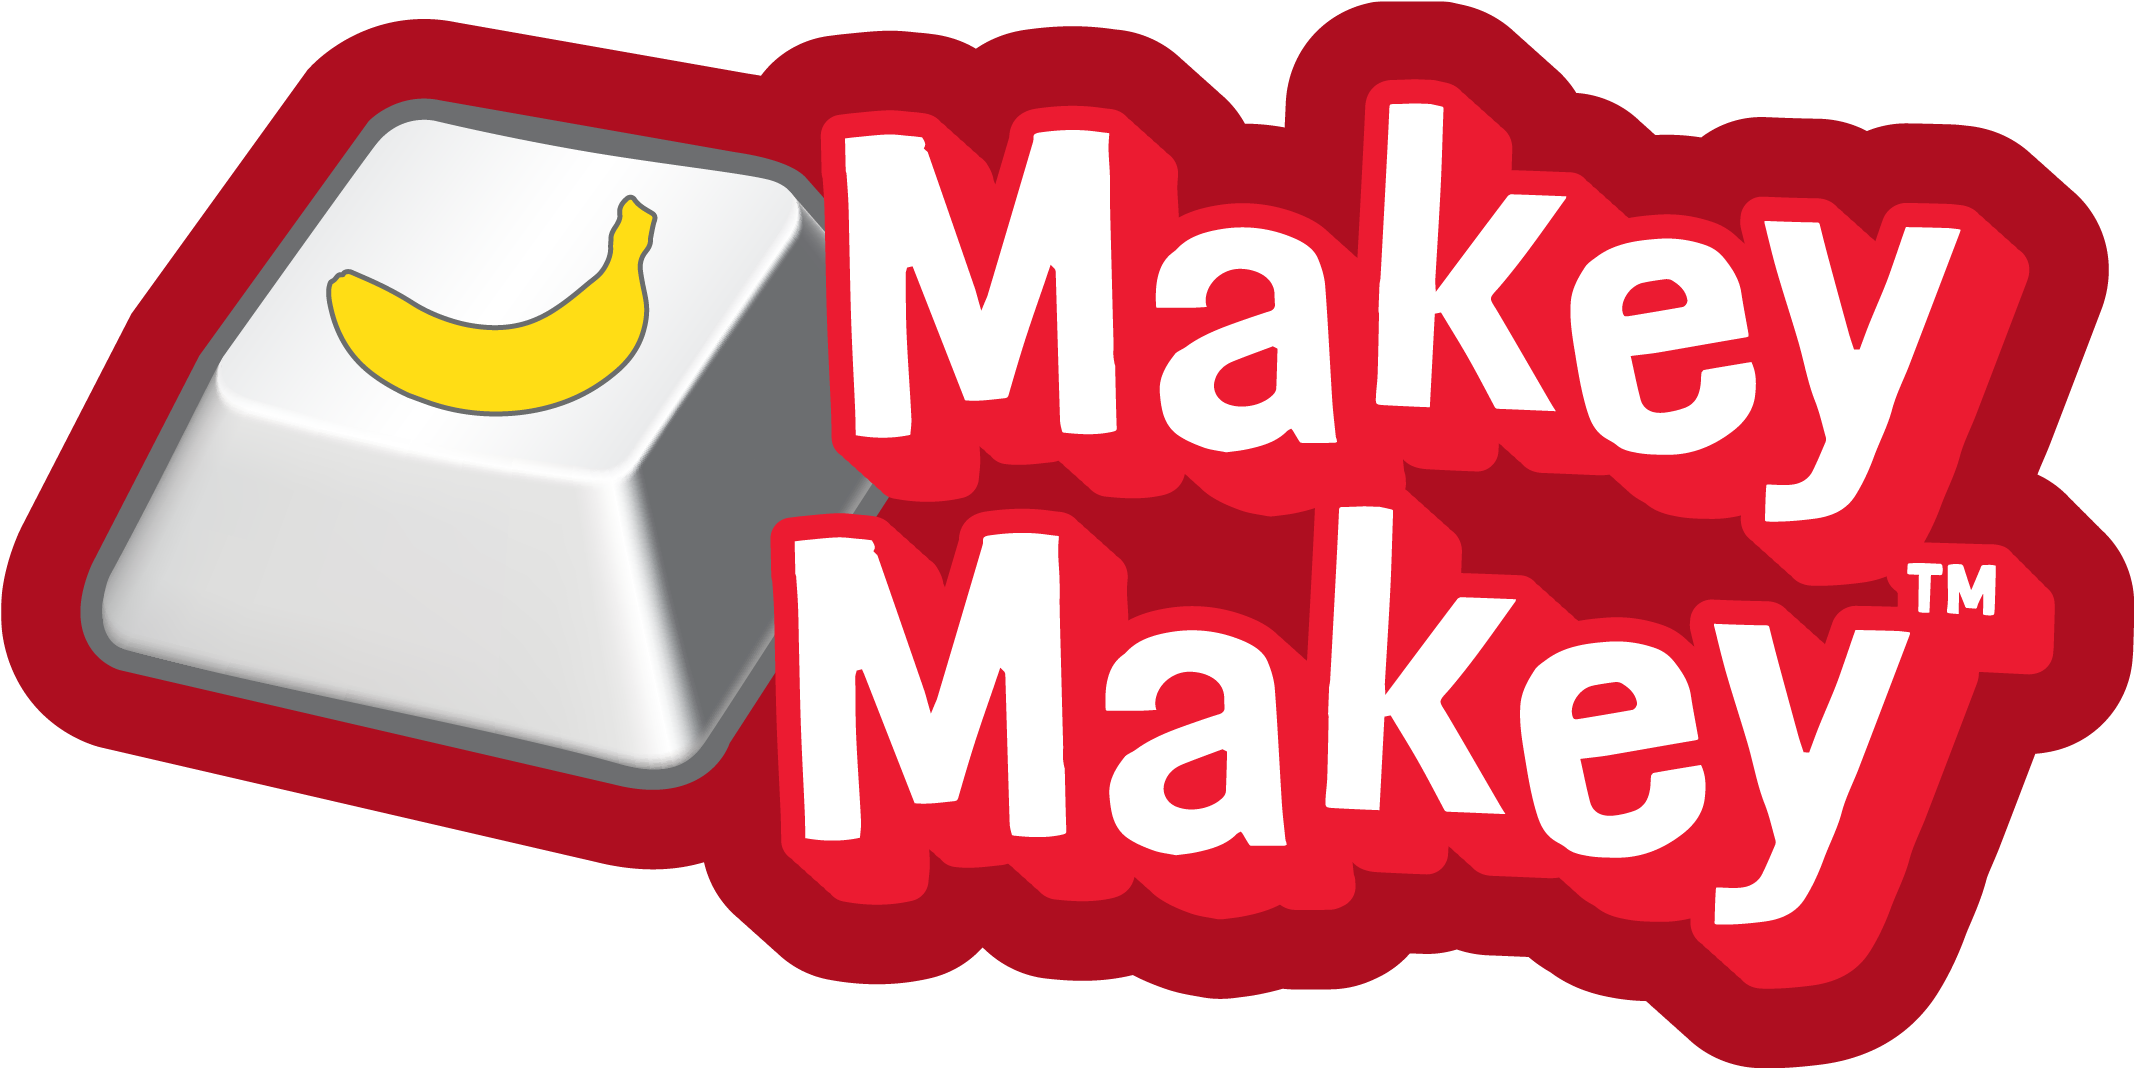 Makey Makey - An Invention Kit For Everyone (2133x1230)